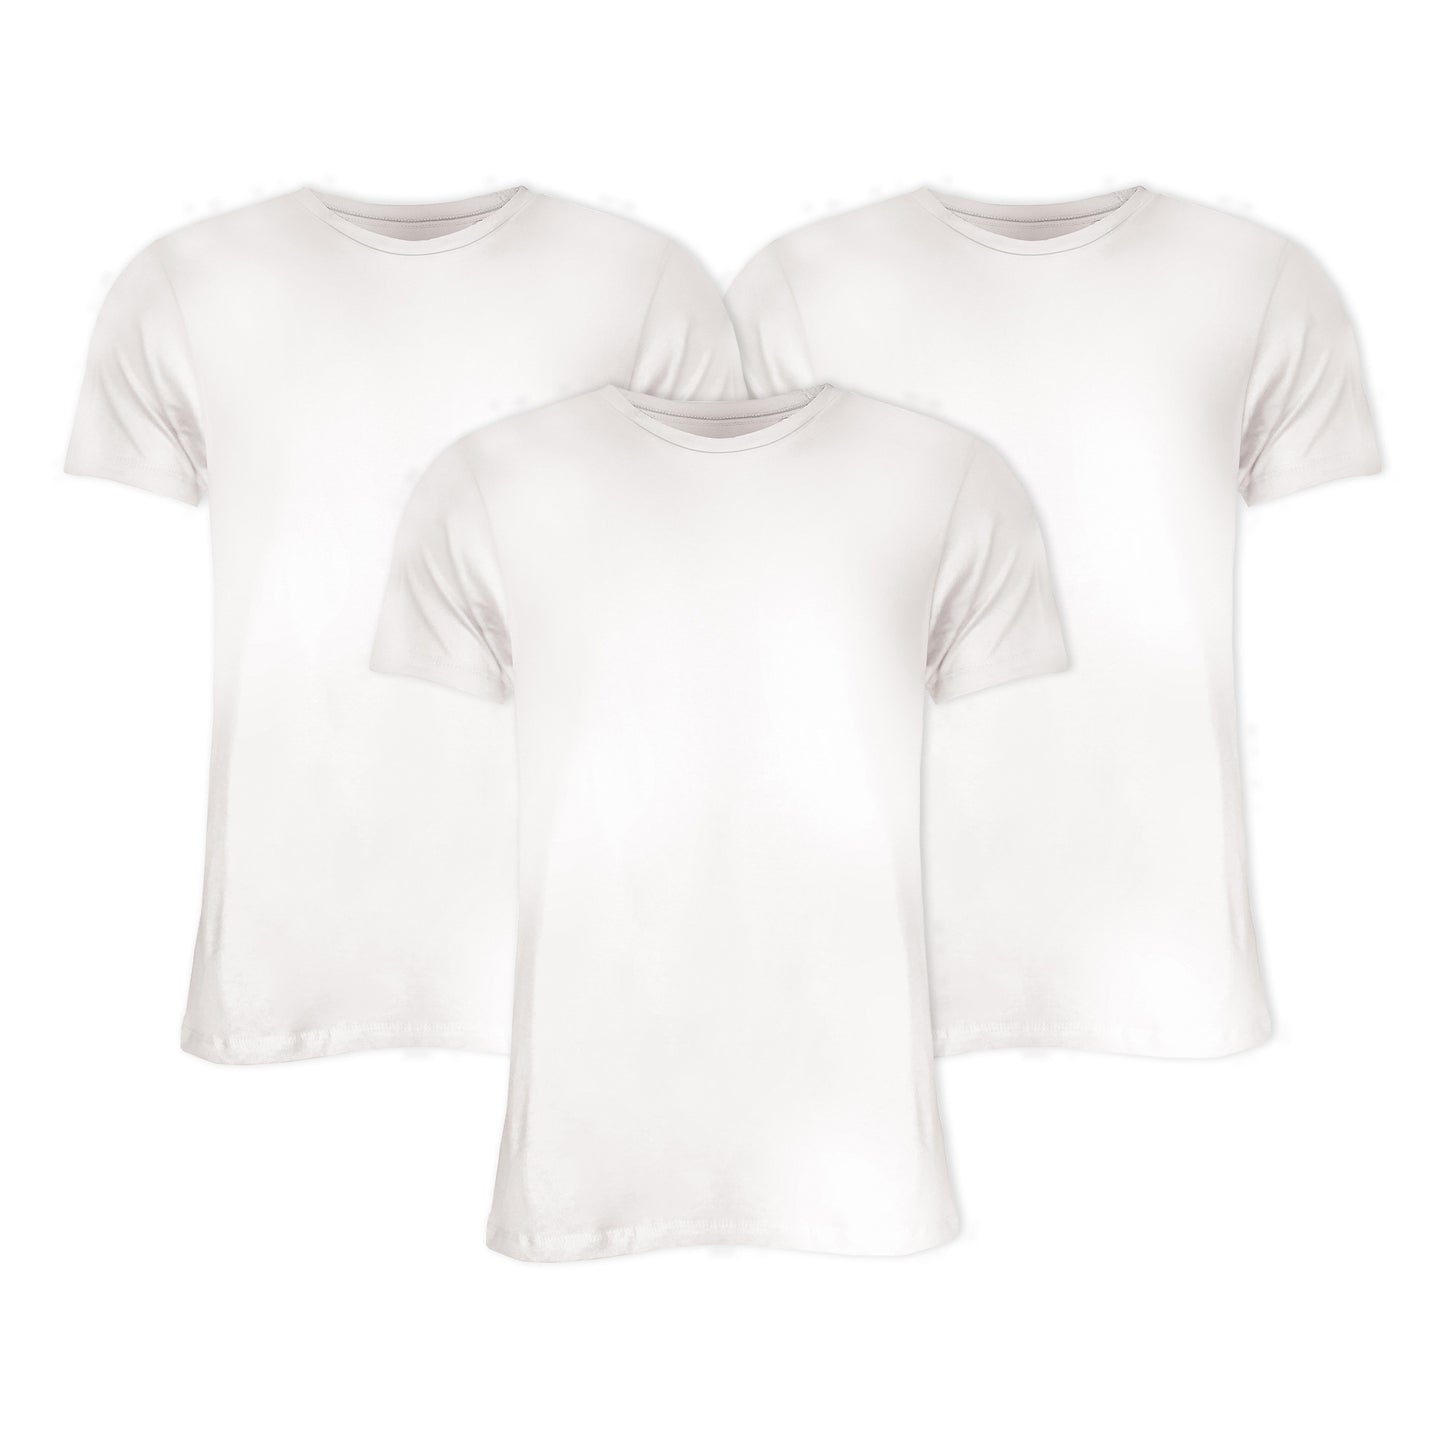 All American Clothing Co. -  60/40 Undershirt 3-Pack